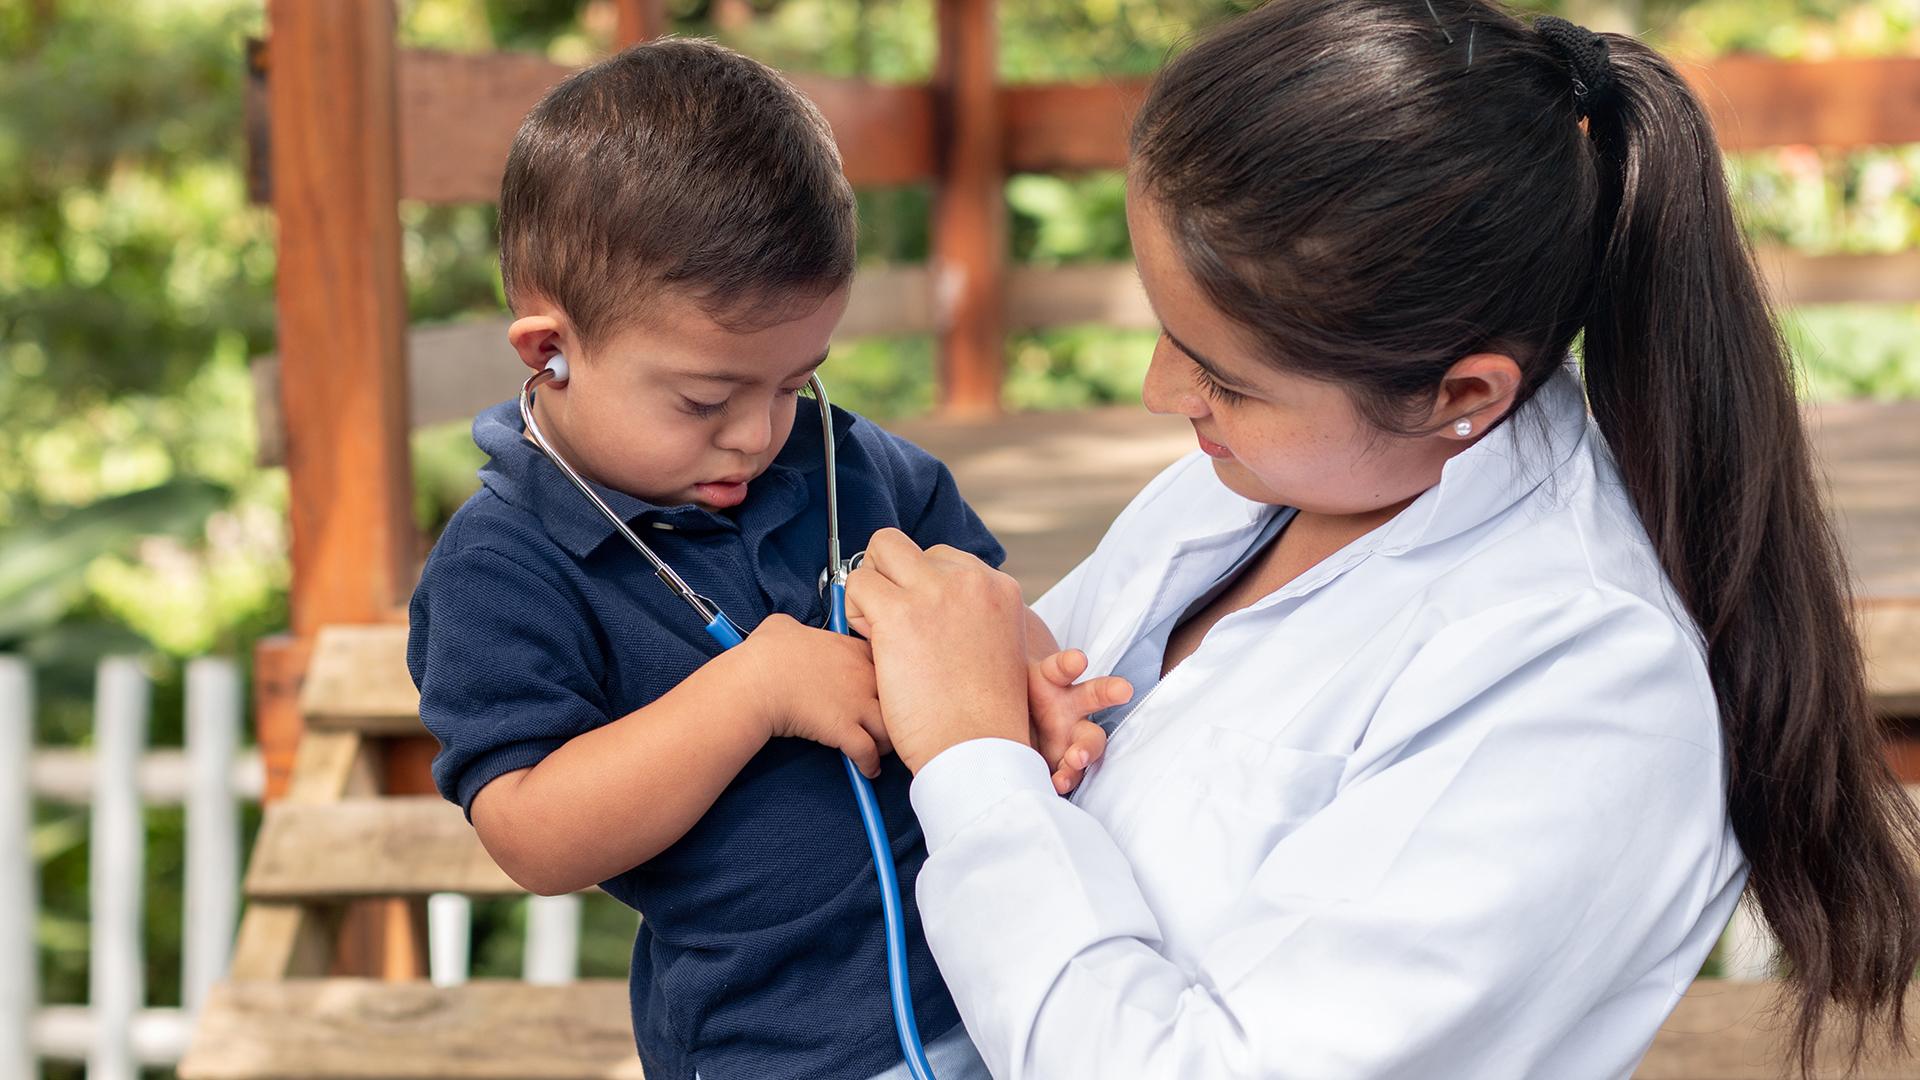 A pediatrician teaches how to listen to the heart of a child with Down syndrome.